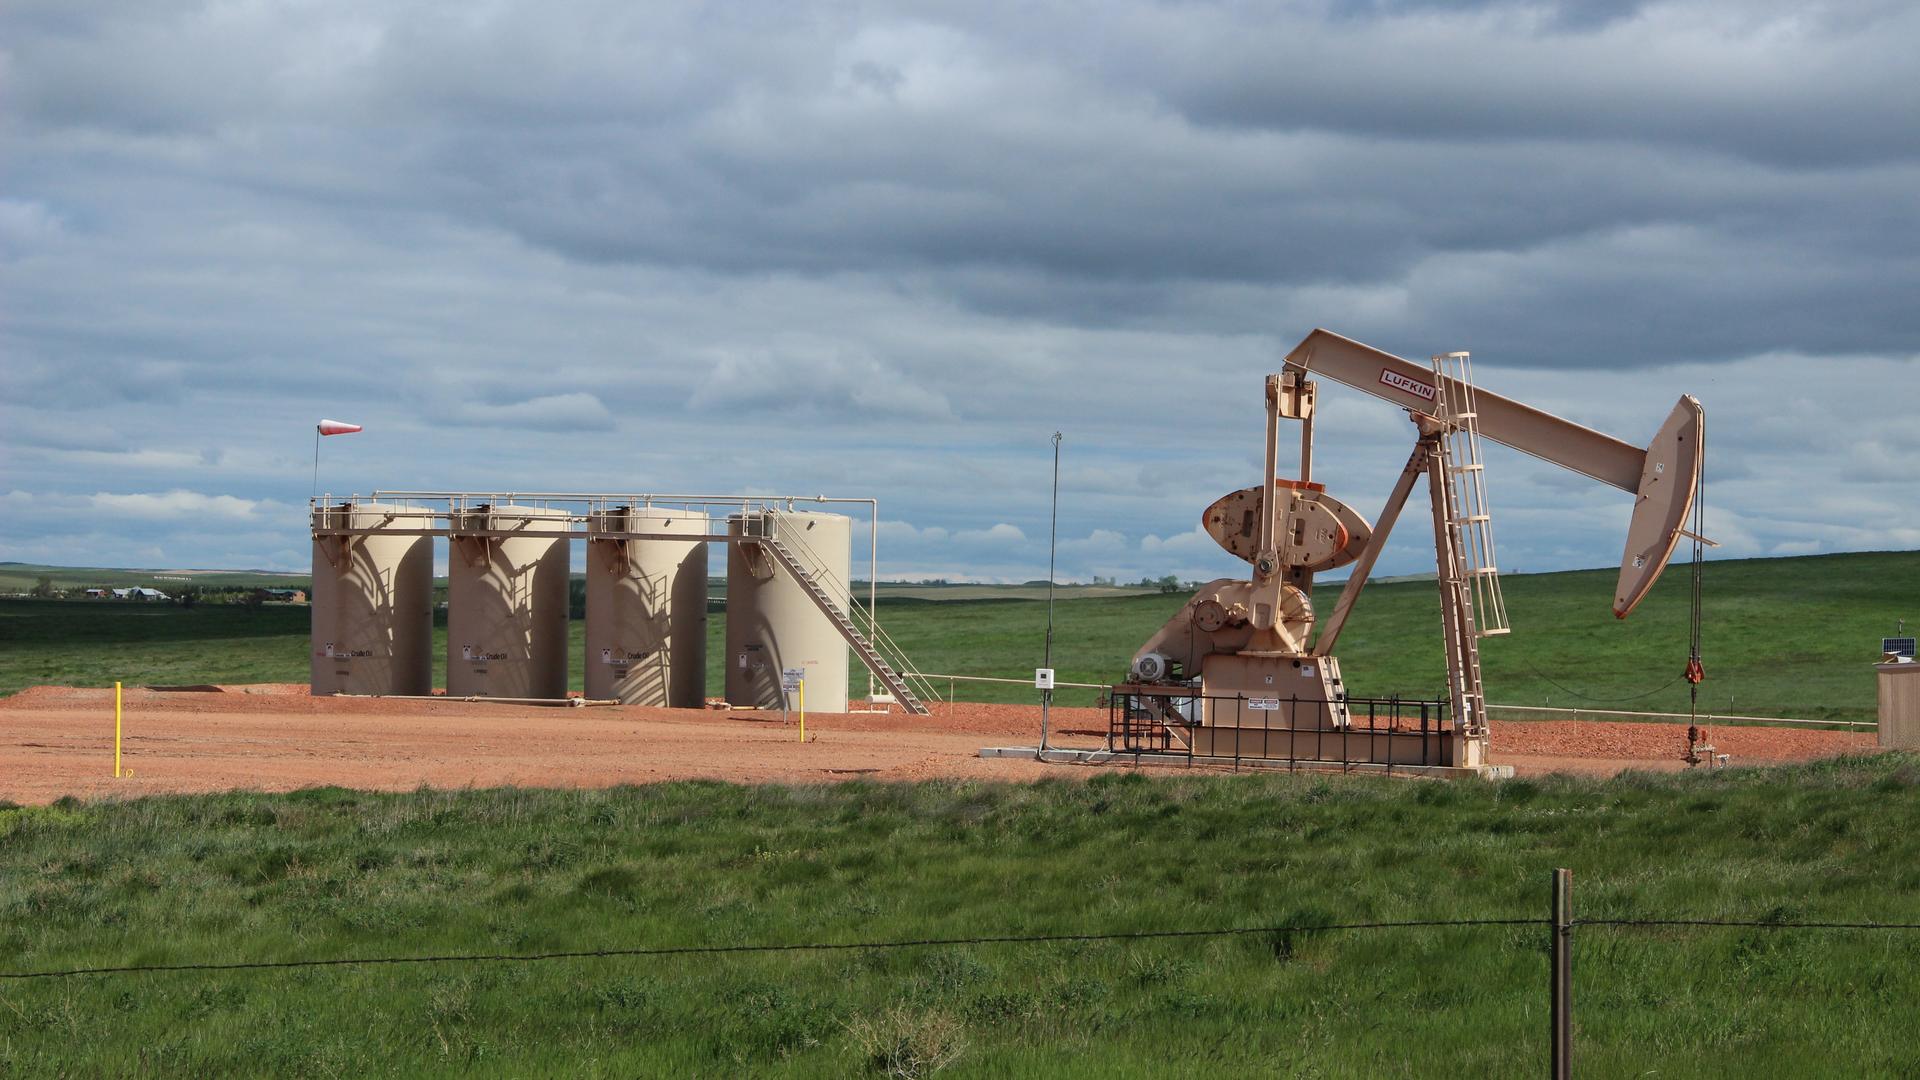 Oil wells dot the rural, agricultural landscape surrounding Williston, North Dakota. The Bakken formation has become one of the largest sources of new oil production in the US.  